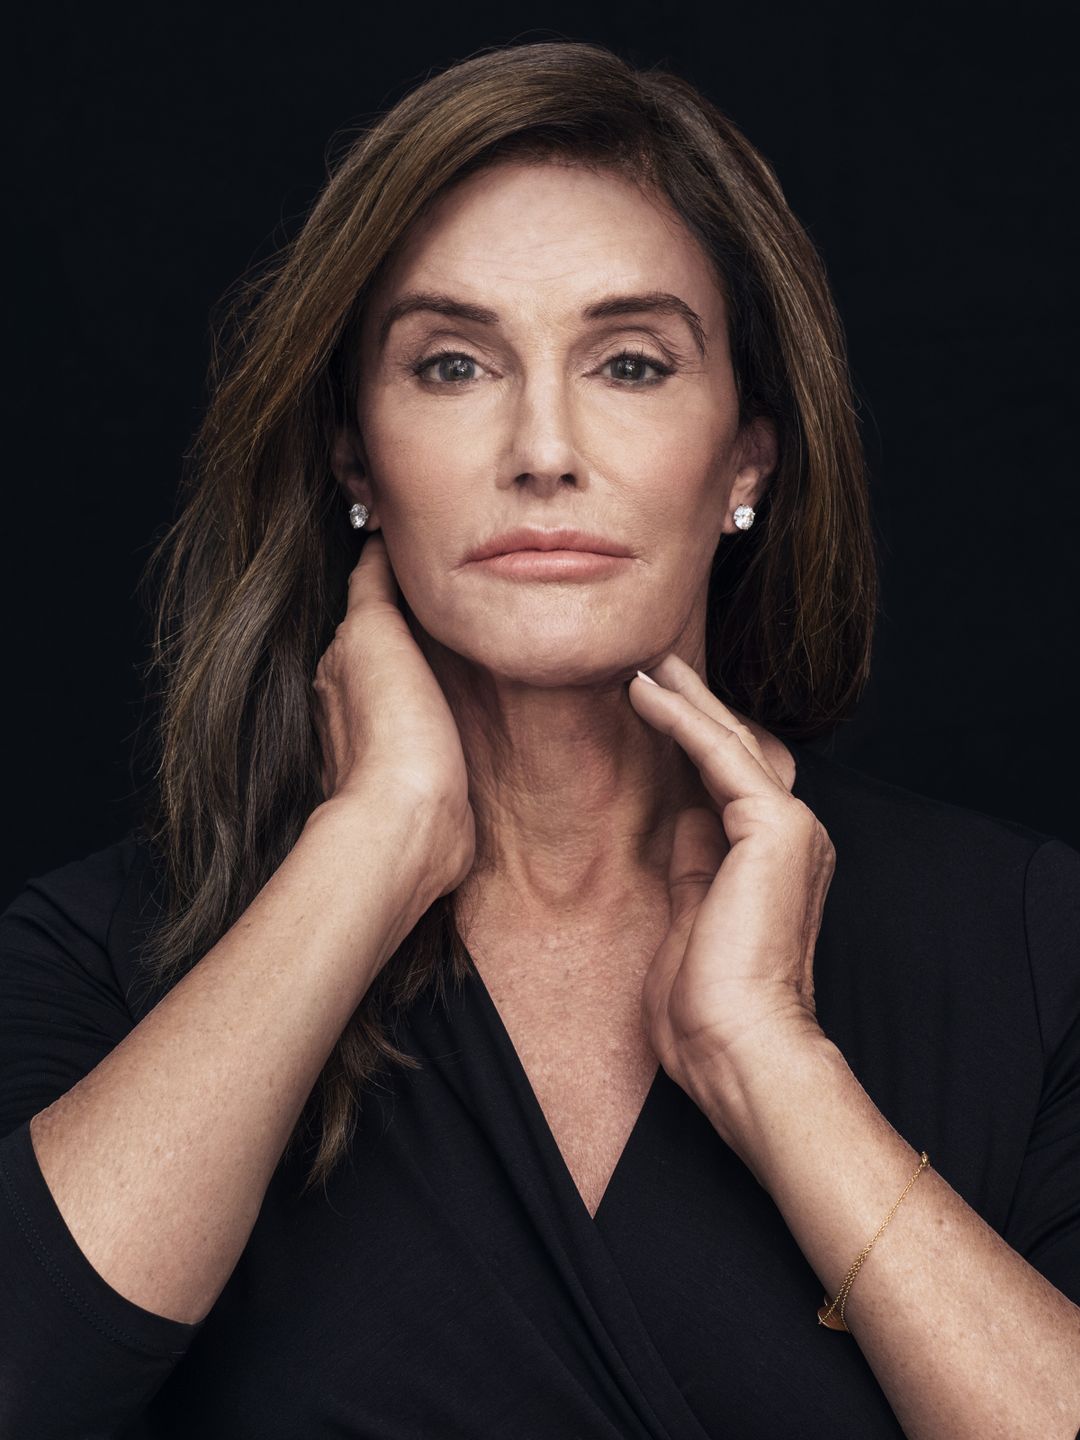 Caitlyn Jenner does she have a husband